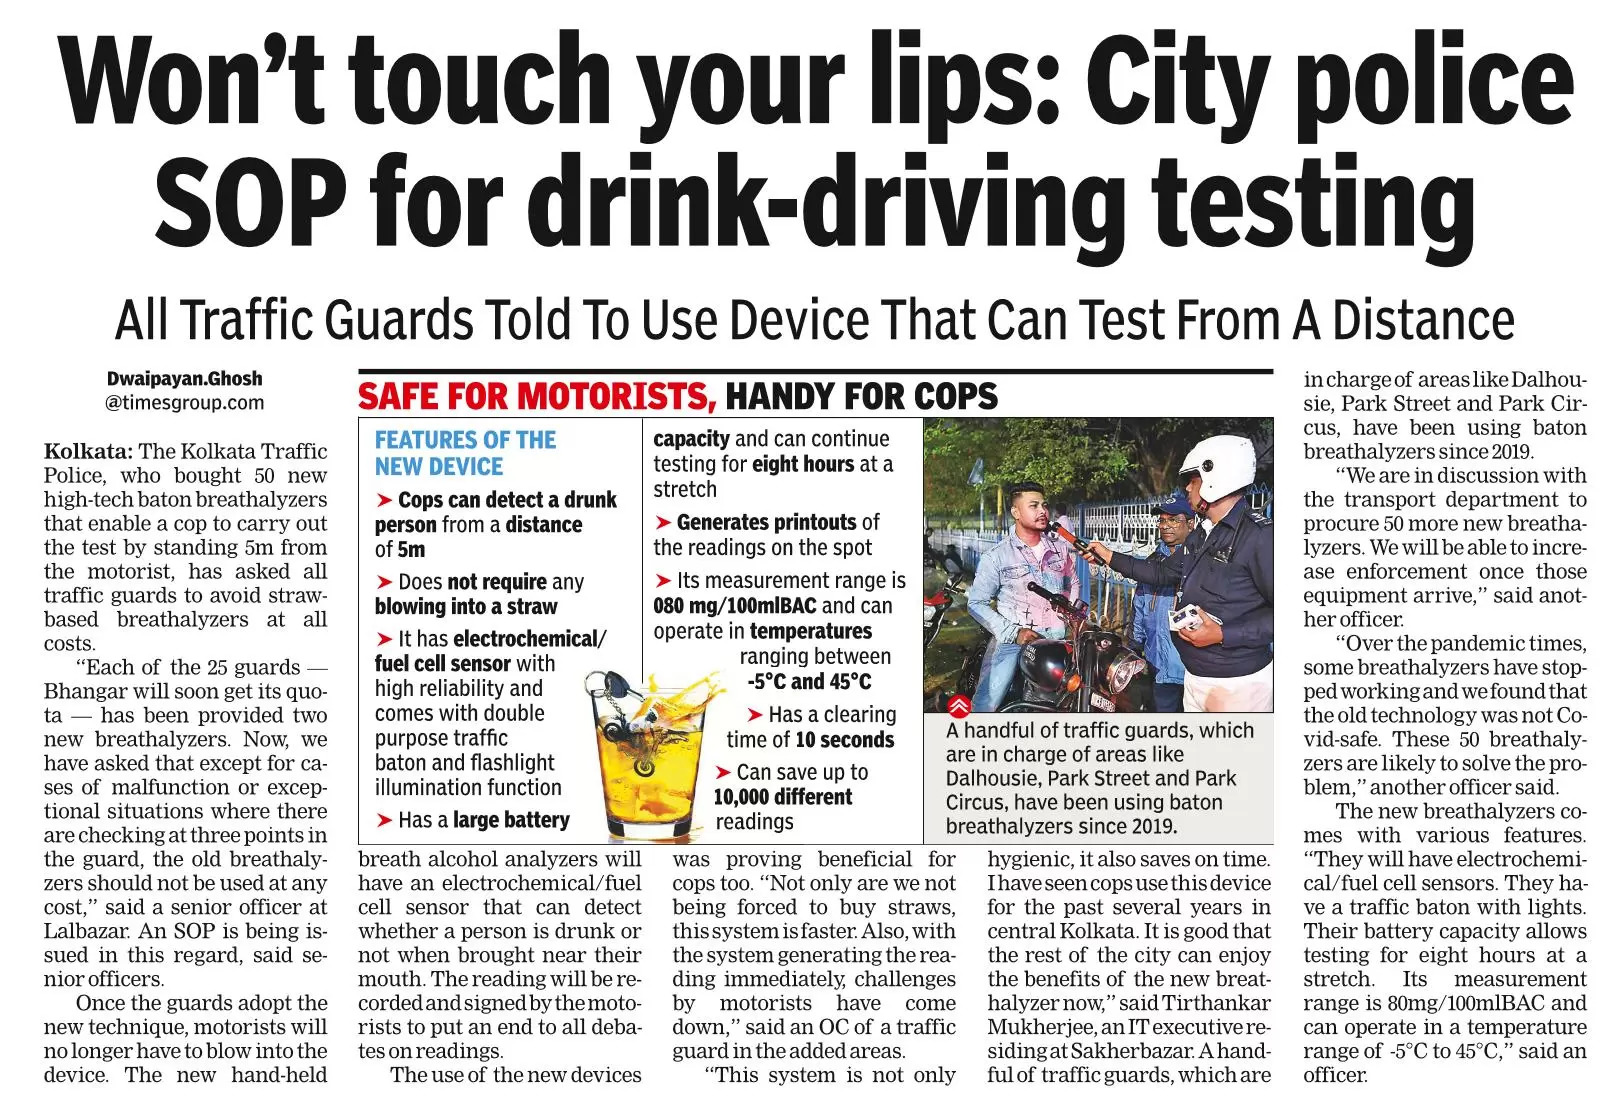 More new breathalyzers for all KP traffic guards